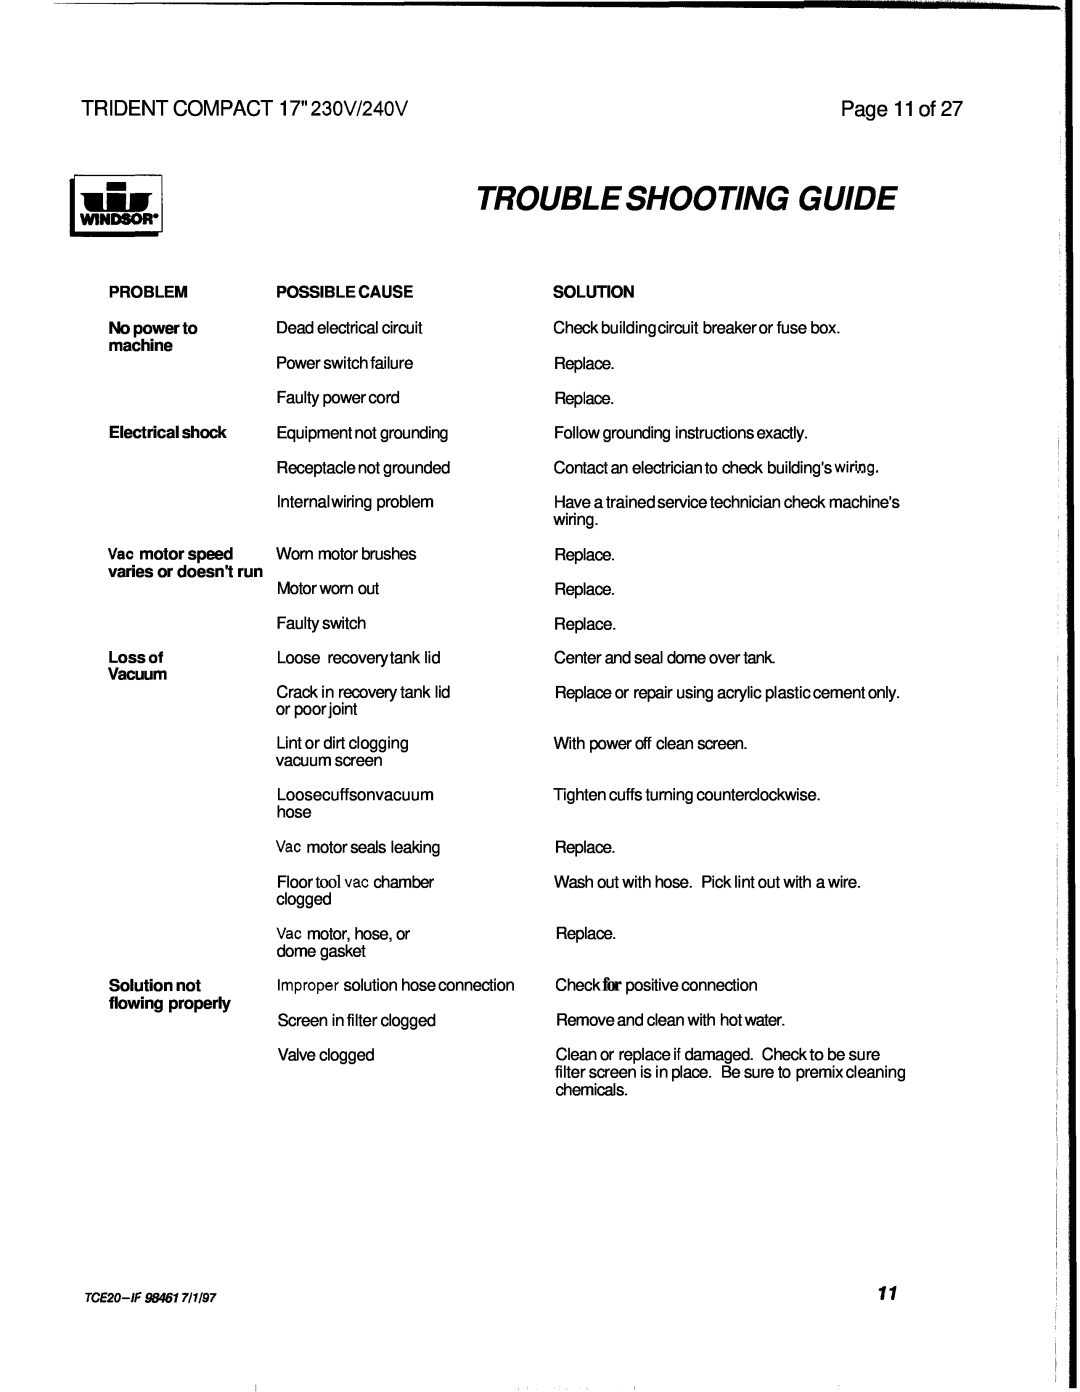 Windsor Trouble Shooting Guide, Page 11 of, TRIDENT COMPACT 17 230V/240V, Solution, No power to, machine, Vacuum 